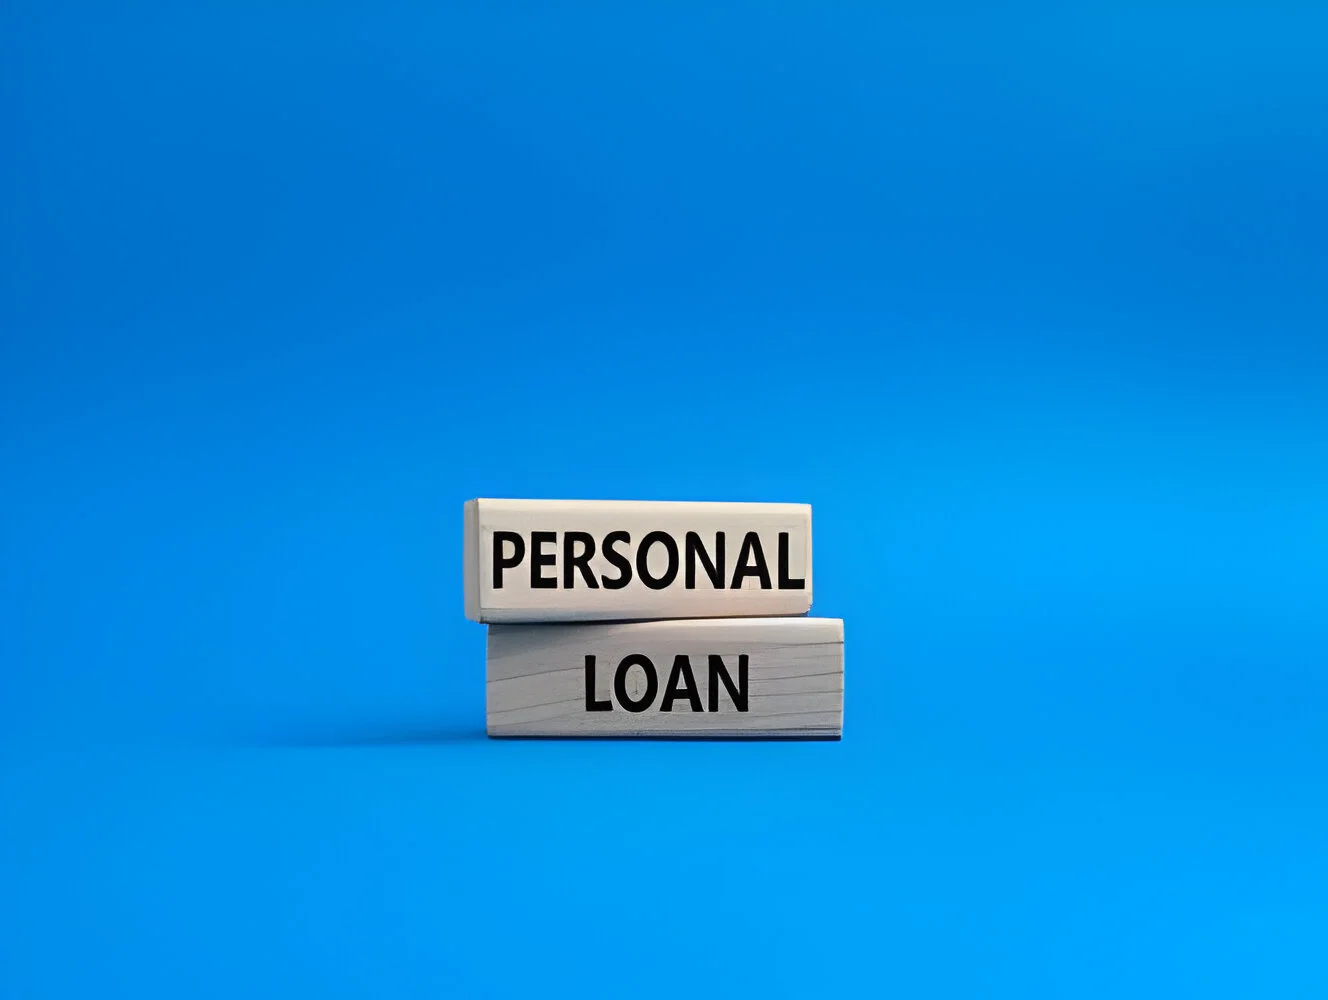 How Much Personal Loan Can I Get on a ₹25,000 Salary?